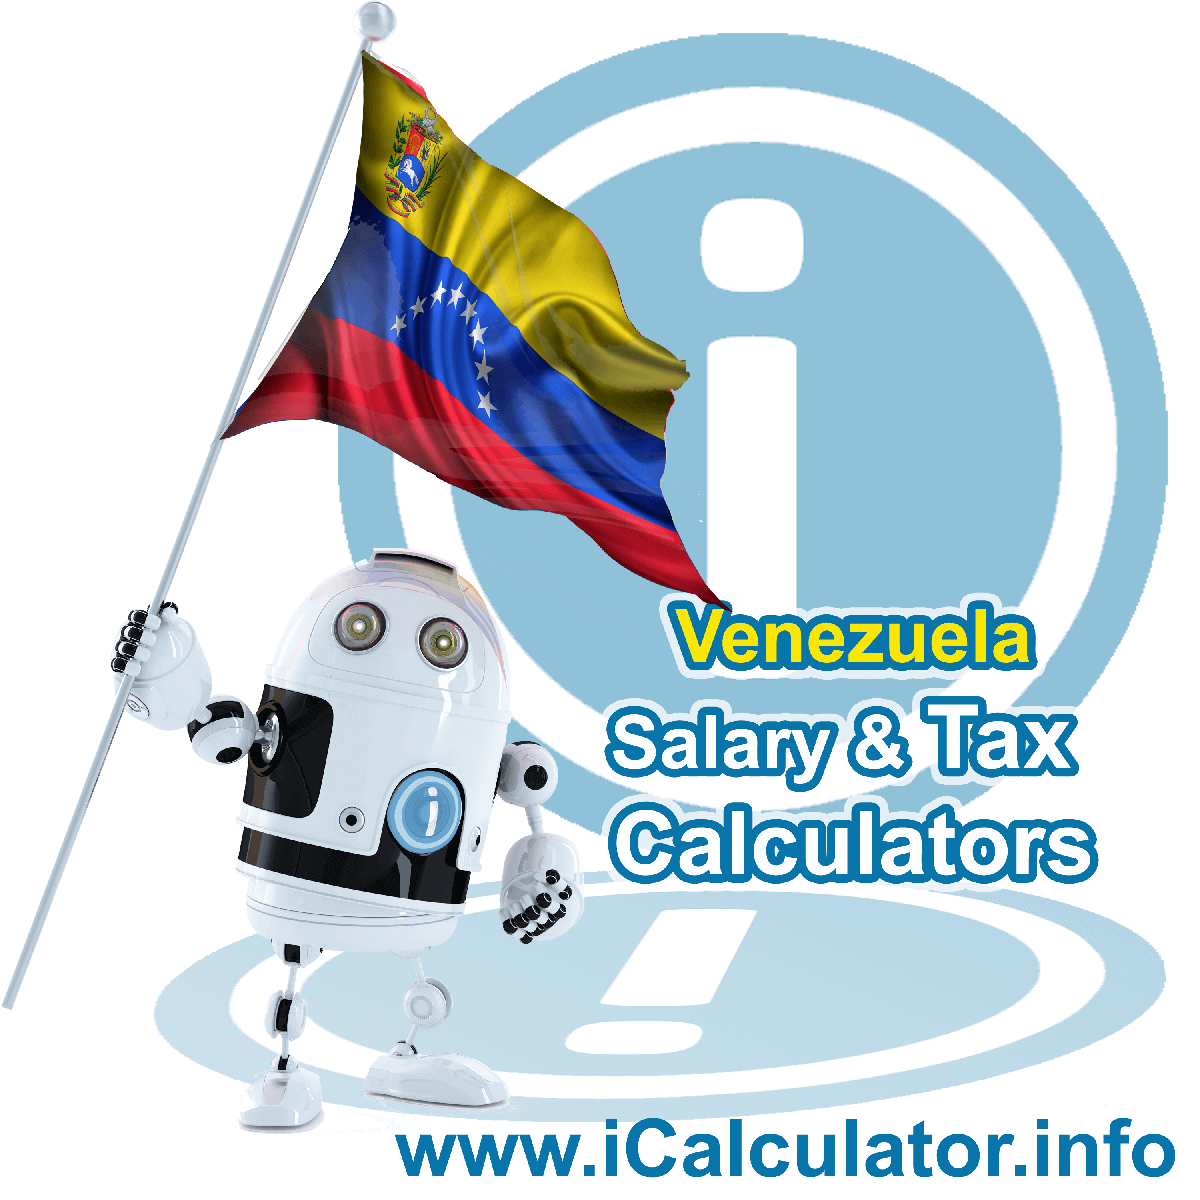 Venezuela Tax Calculator. This image shows the Venezuela flag and information relating to the tax formula for the Venezuela Salary Calculator